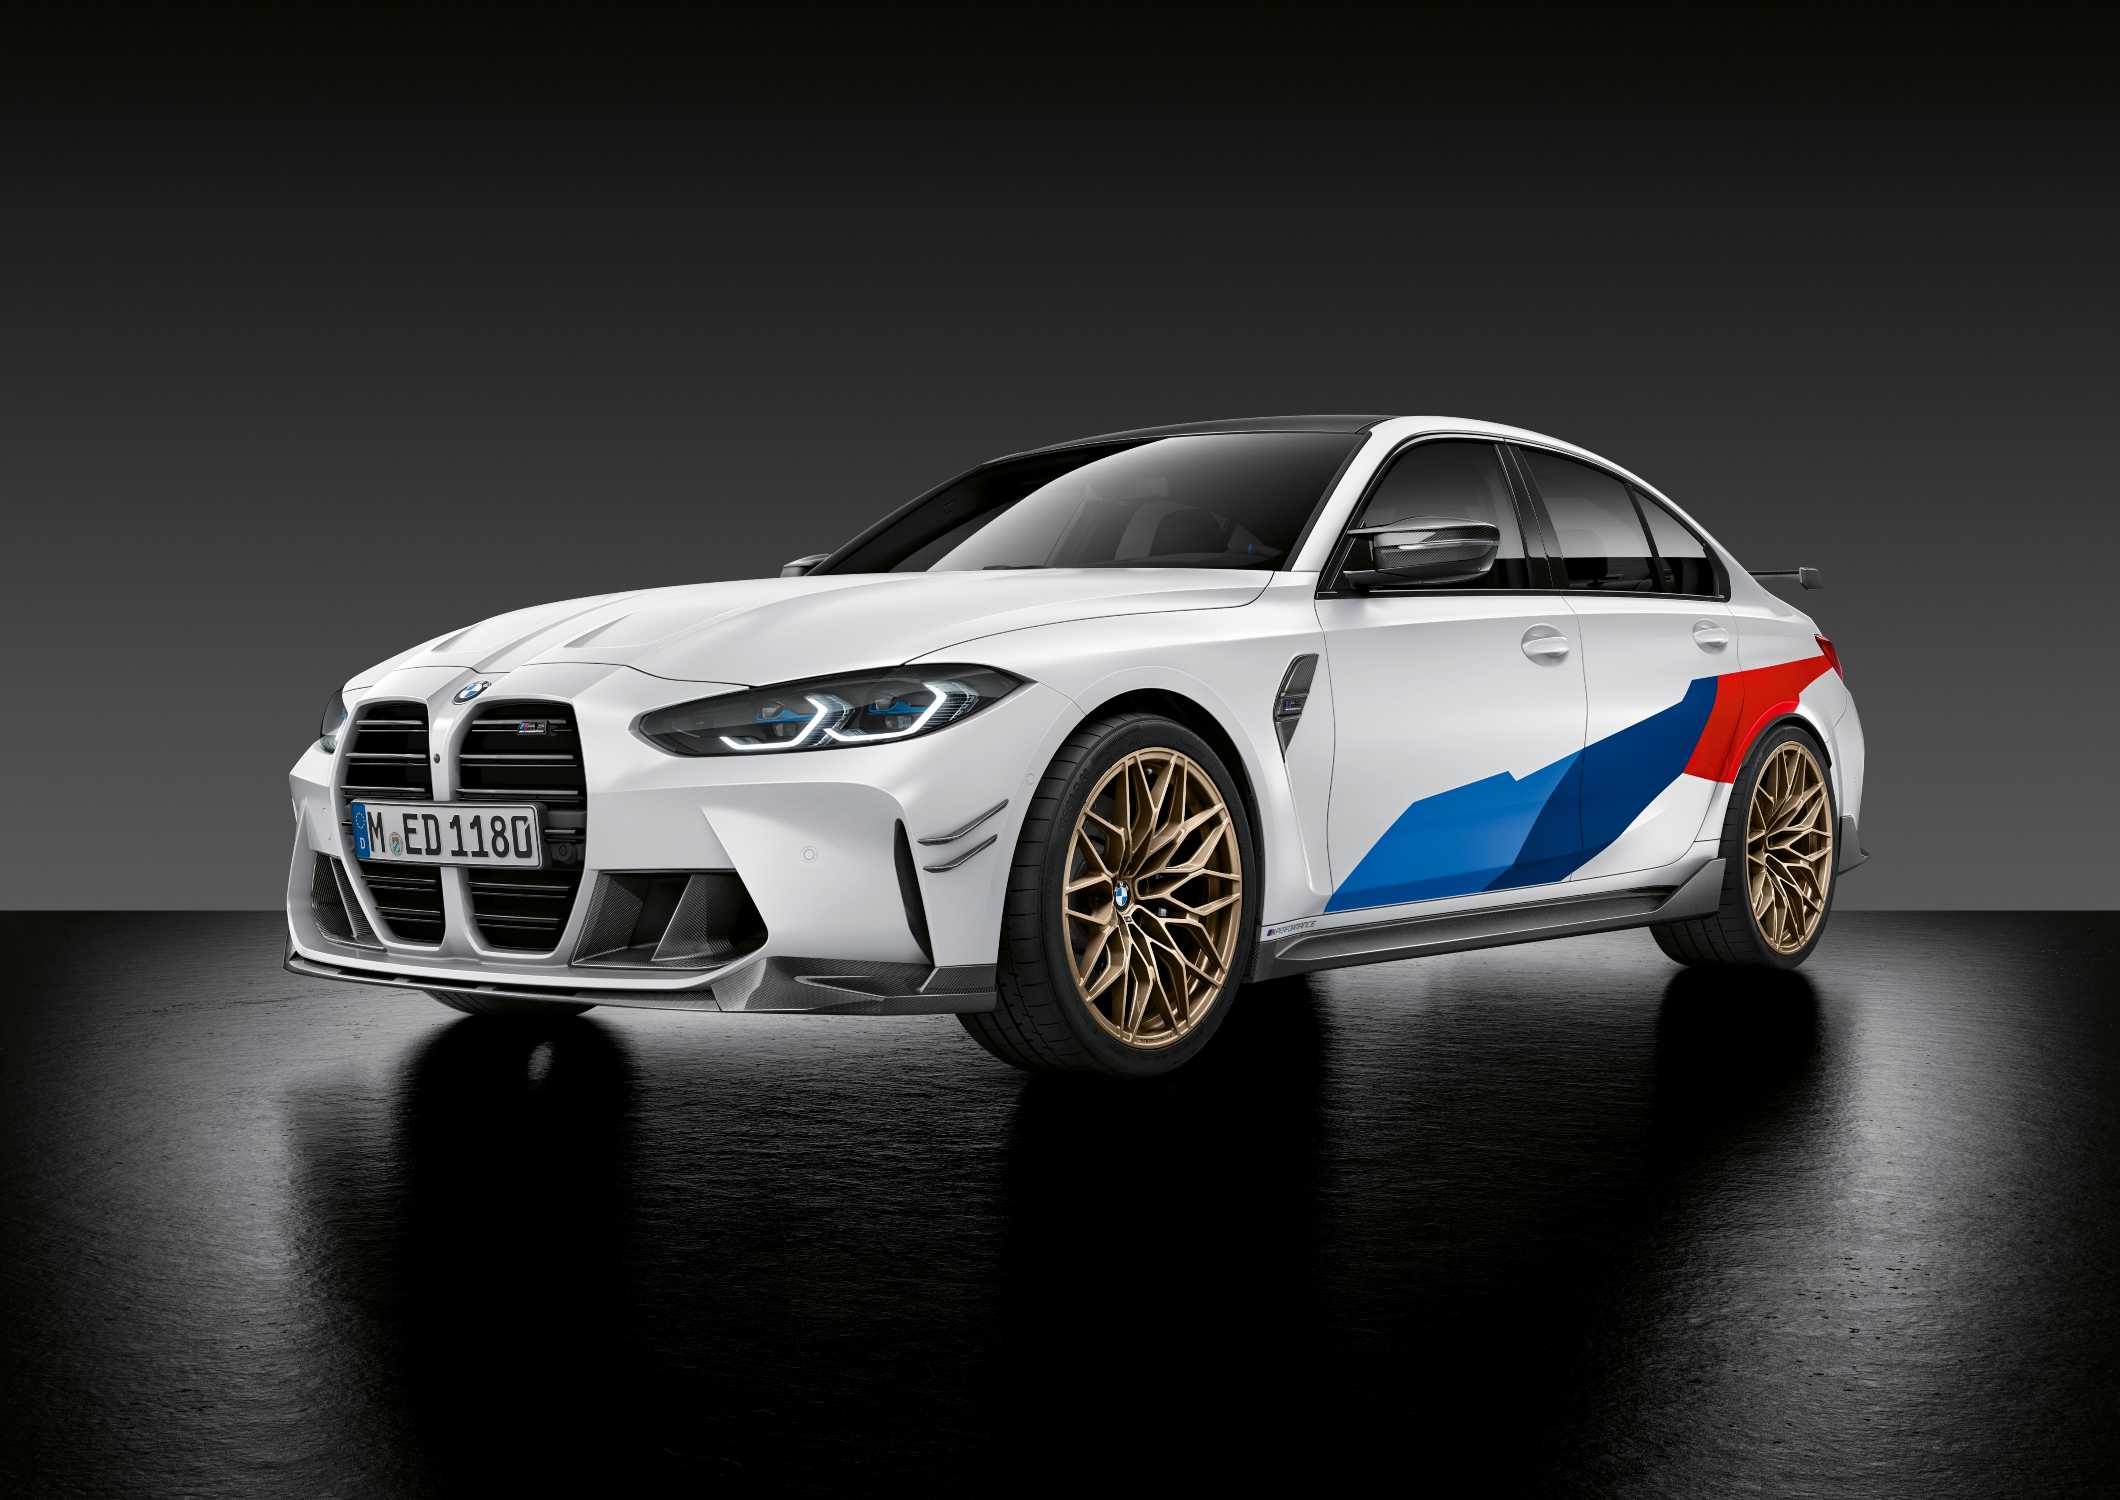 Wide range of M Performance Parts already available at market launch of the  all-new BMW M3 Sedan and BMW M4 Coupé.